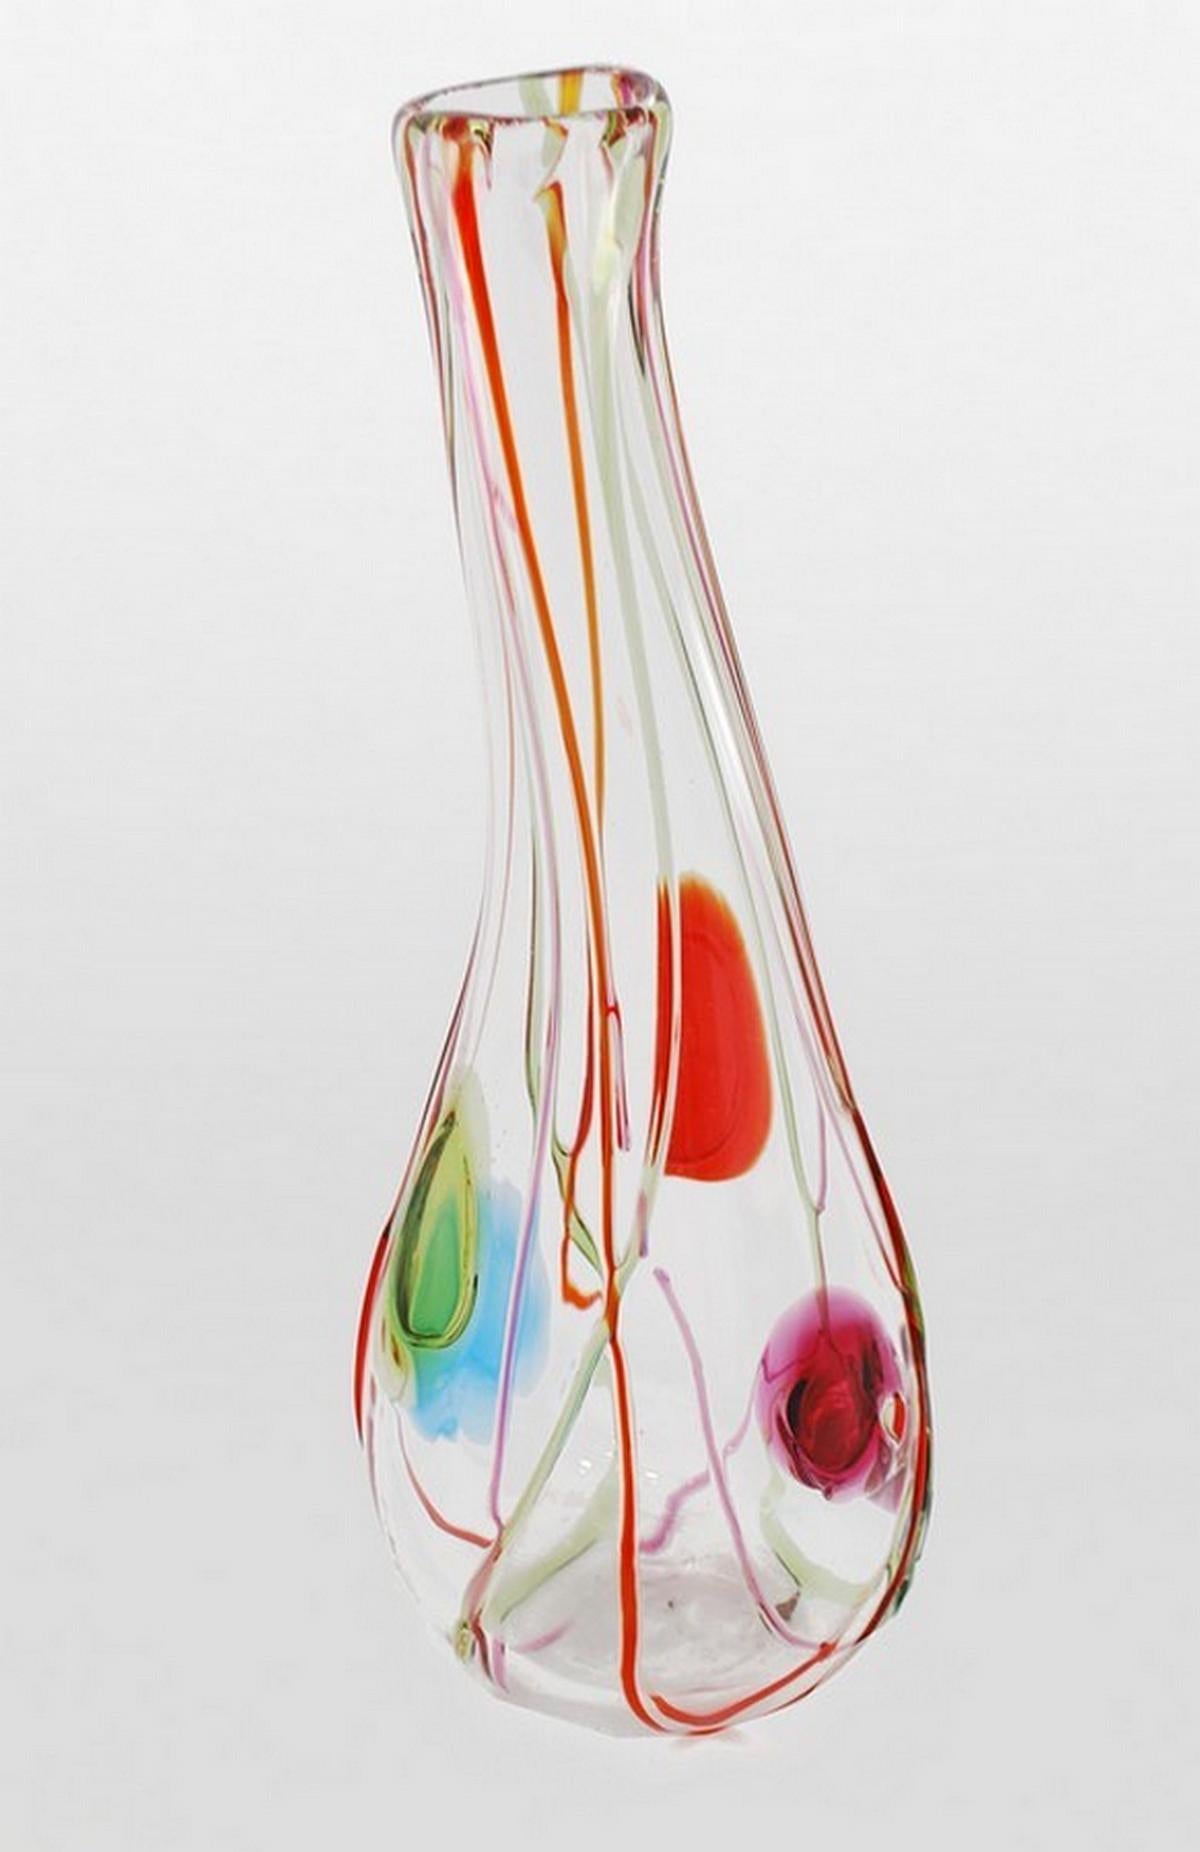 Artist/Designer: Salviati

Additional Information: Salviati is a world renowned Murano based manufacturer of glass since 1859.

Marking(s); notes: Salviati label

Country of origin; materials: Italy; glass

Dimensions: 20″h, 8″dia

Condition: very